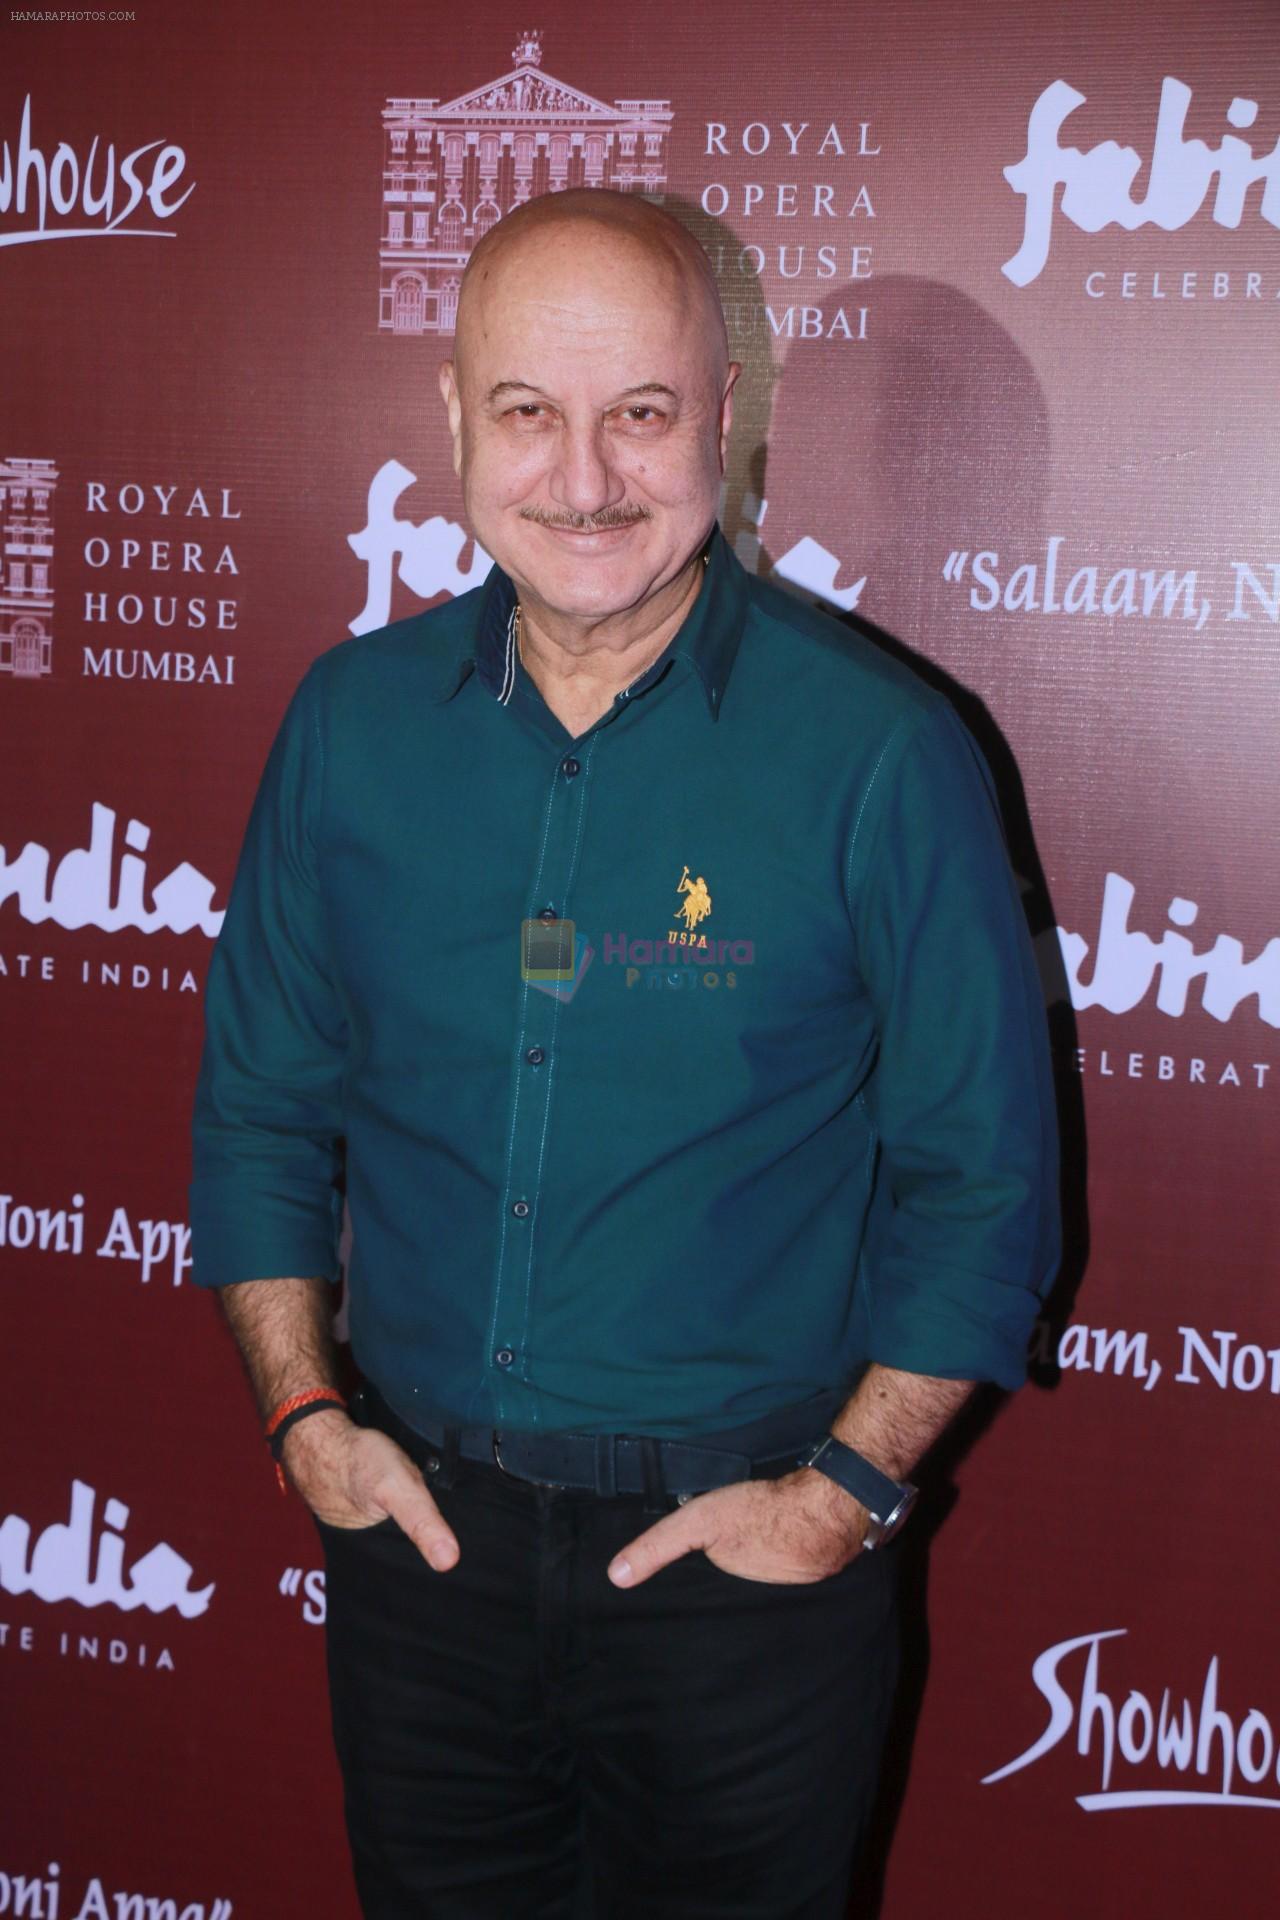 Anupam Kher at the Special preview of Salaam Noni Appa based on Twinkle Khanna's novel at Royal Opera House in mumbai on 28th Oct 2017